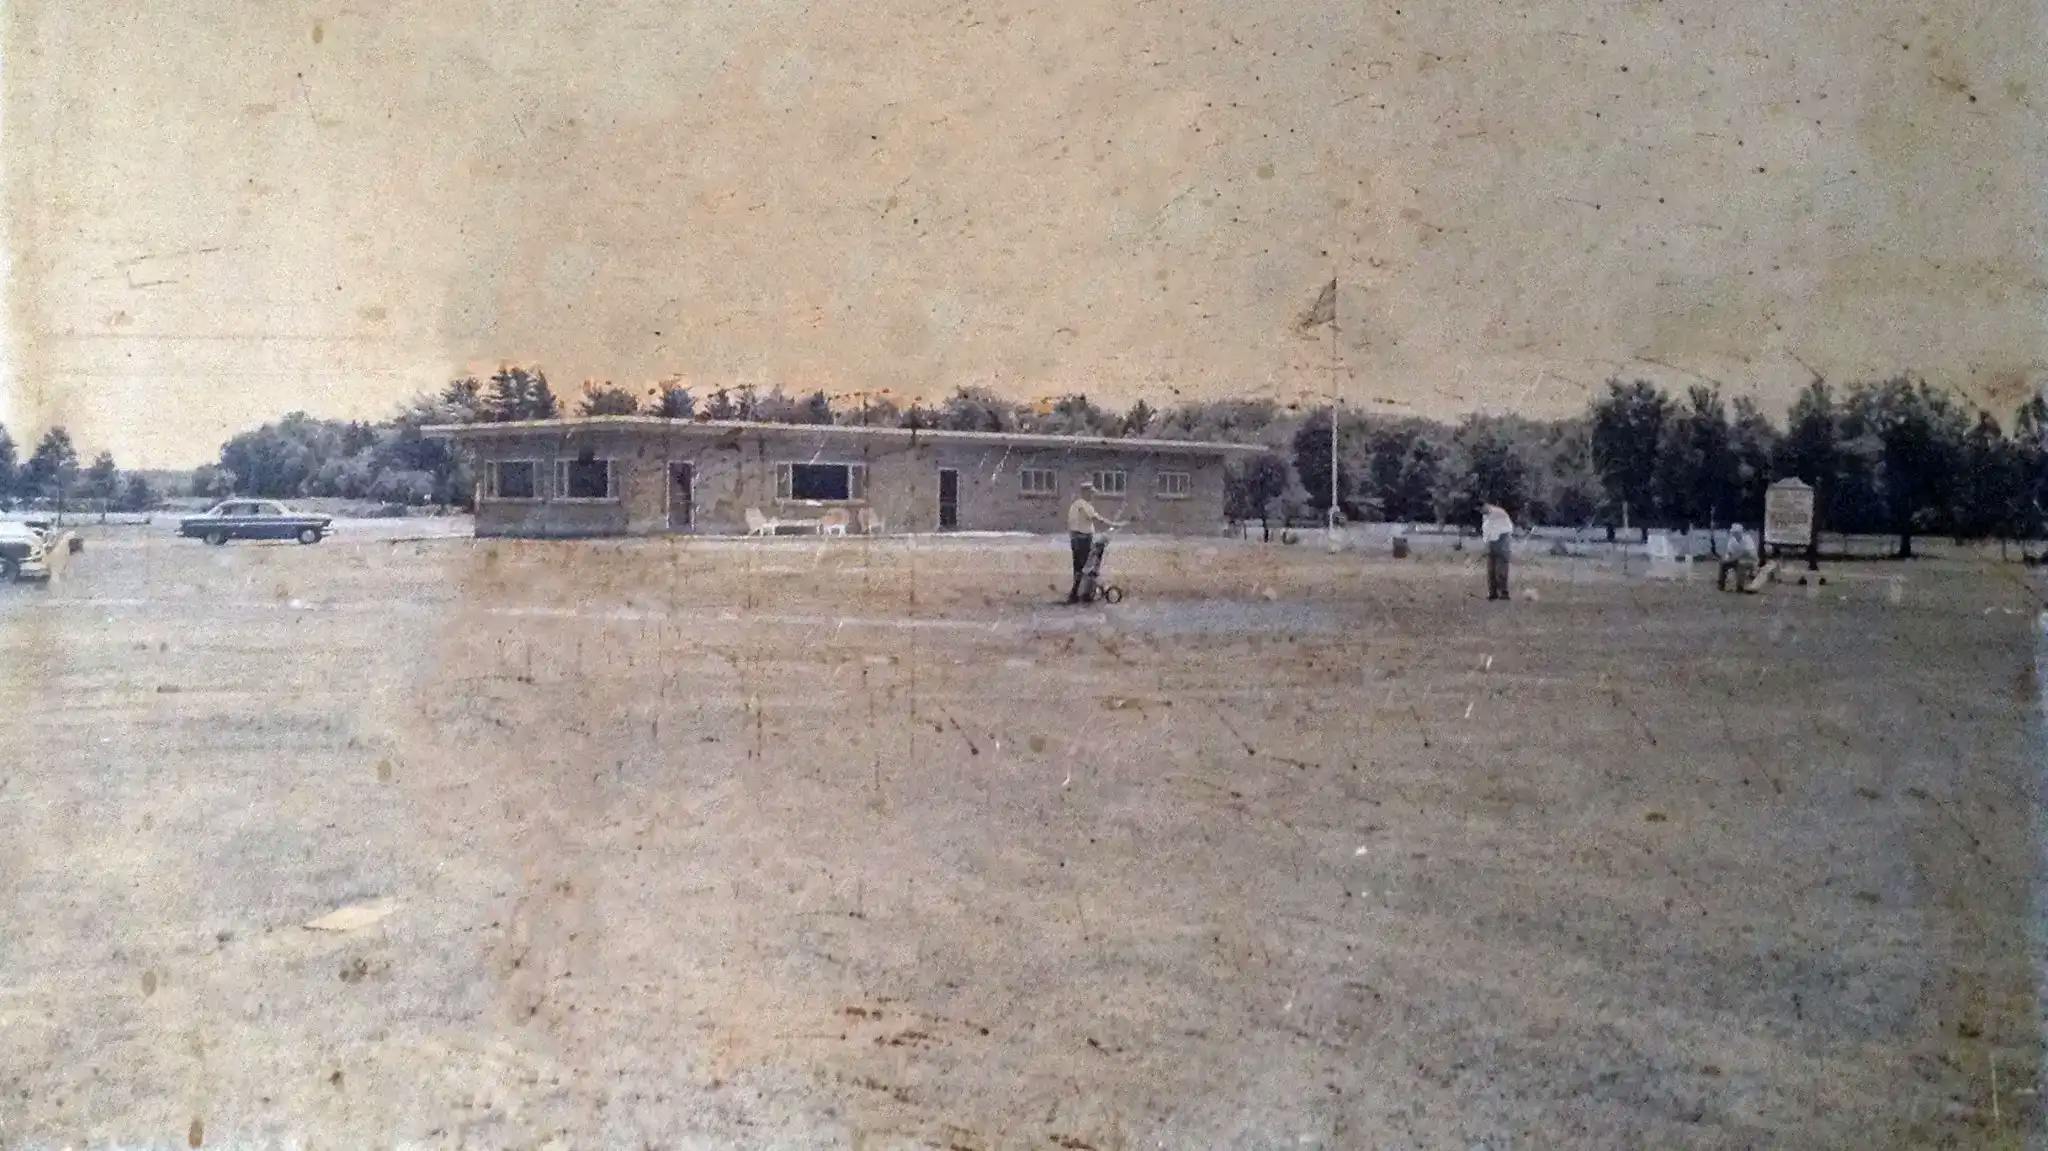 The clubhouse in 1954.